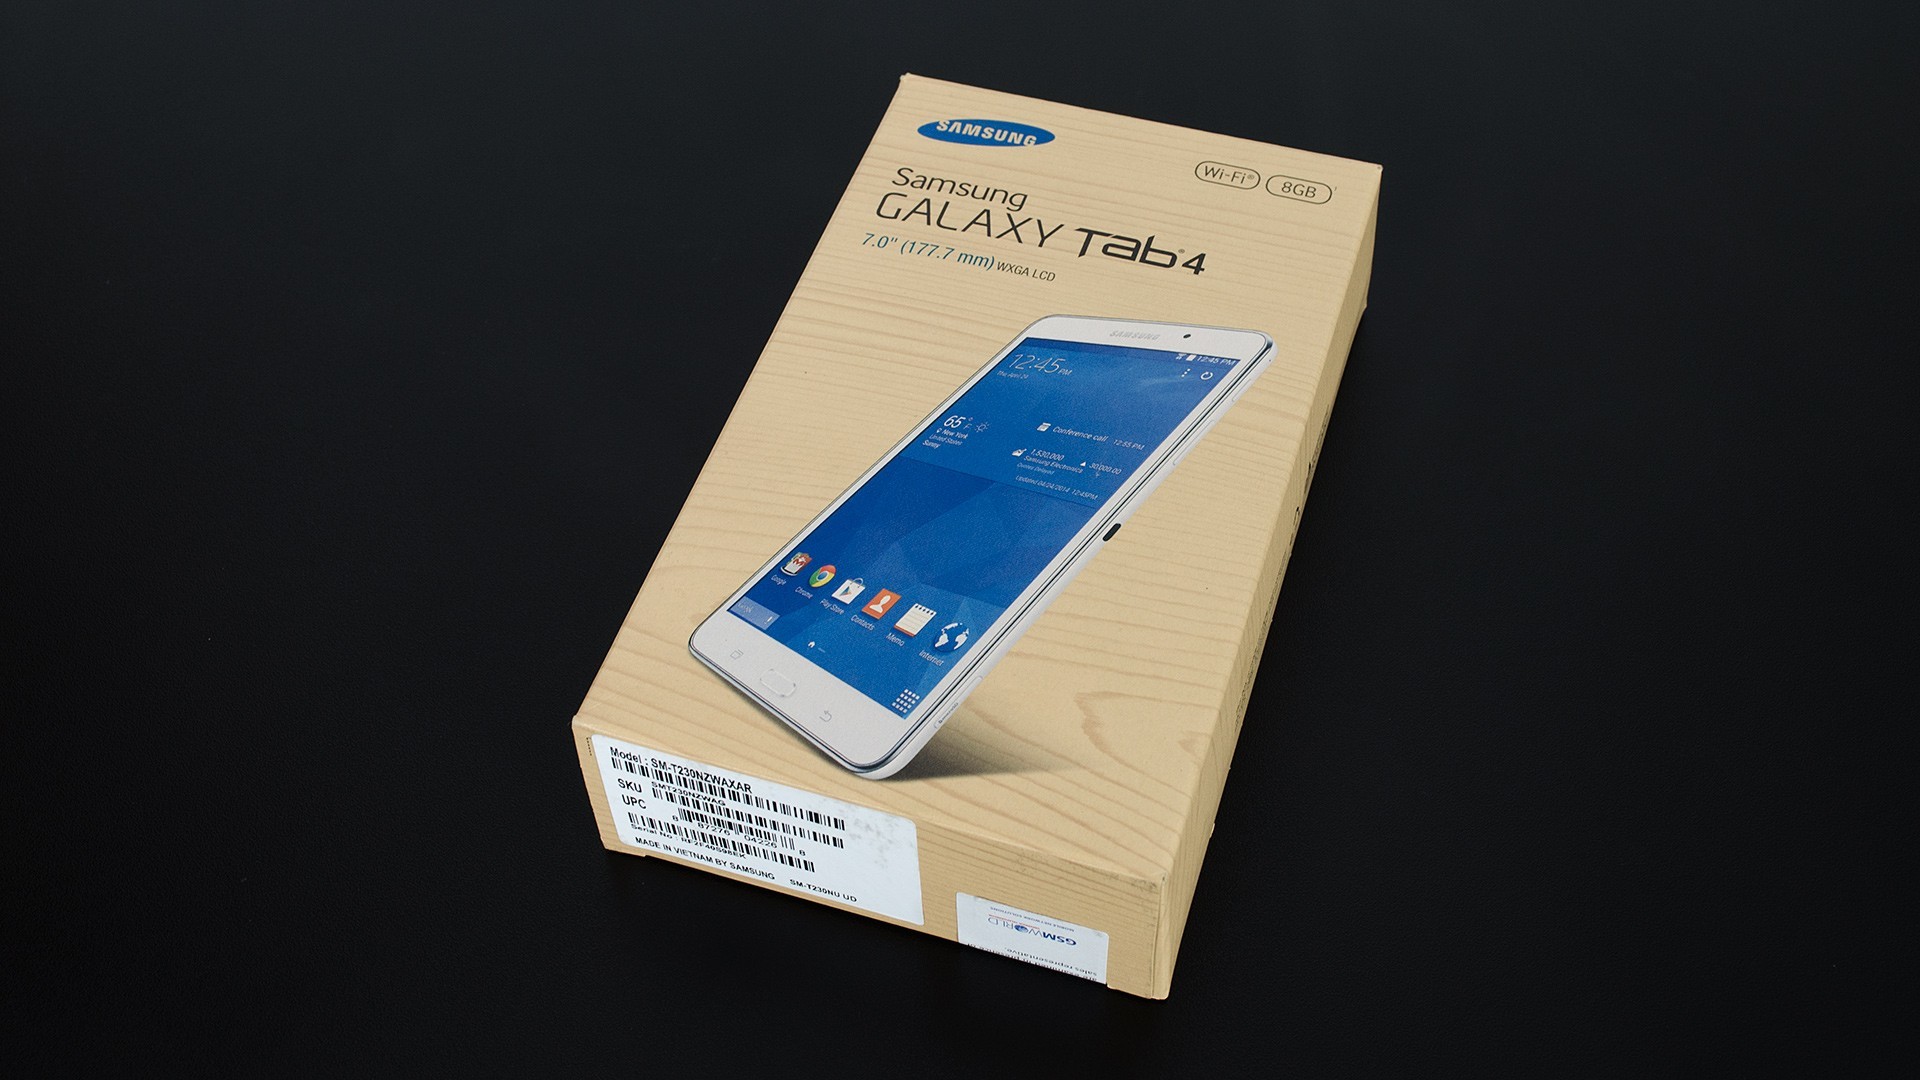 1920x1080 Samsung Galaxy Tab4 7.0 before unboxing ...